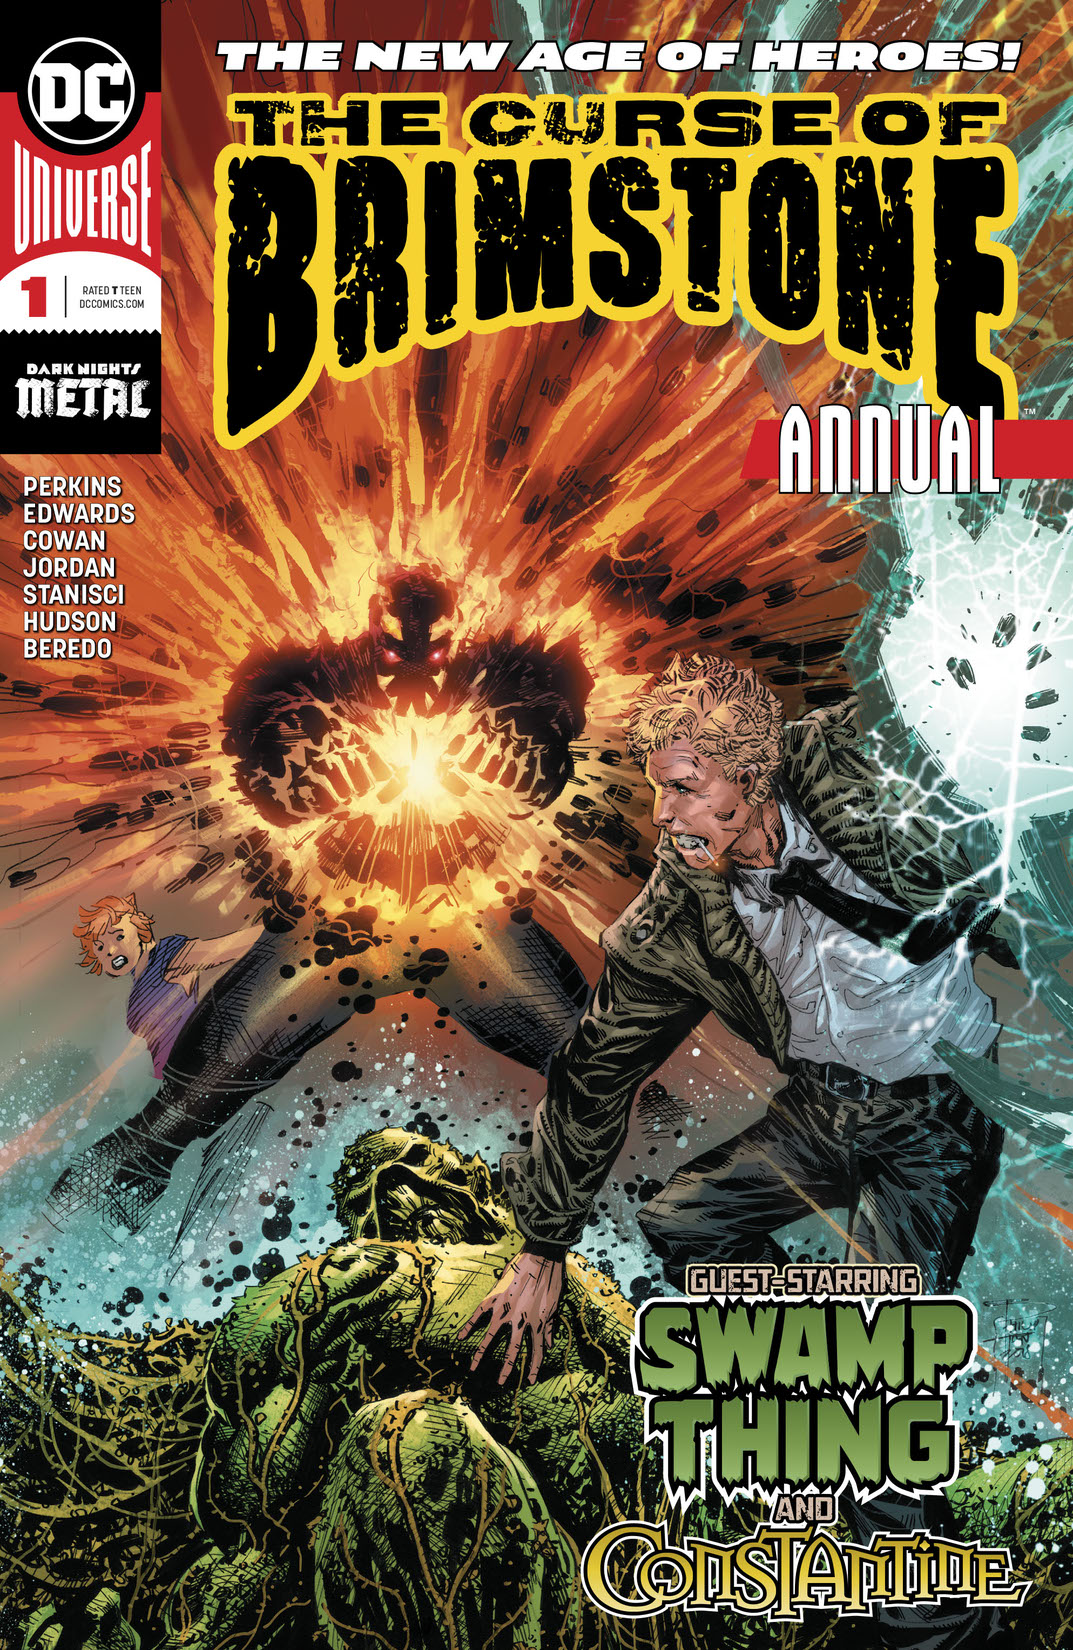 The Curse of Brimstone Annual #1 preview images